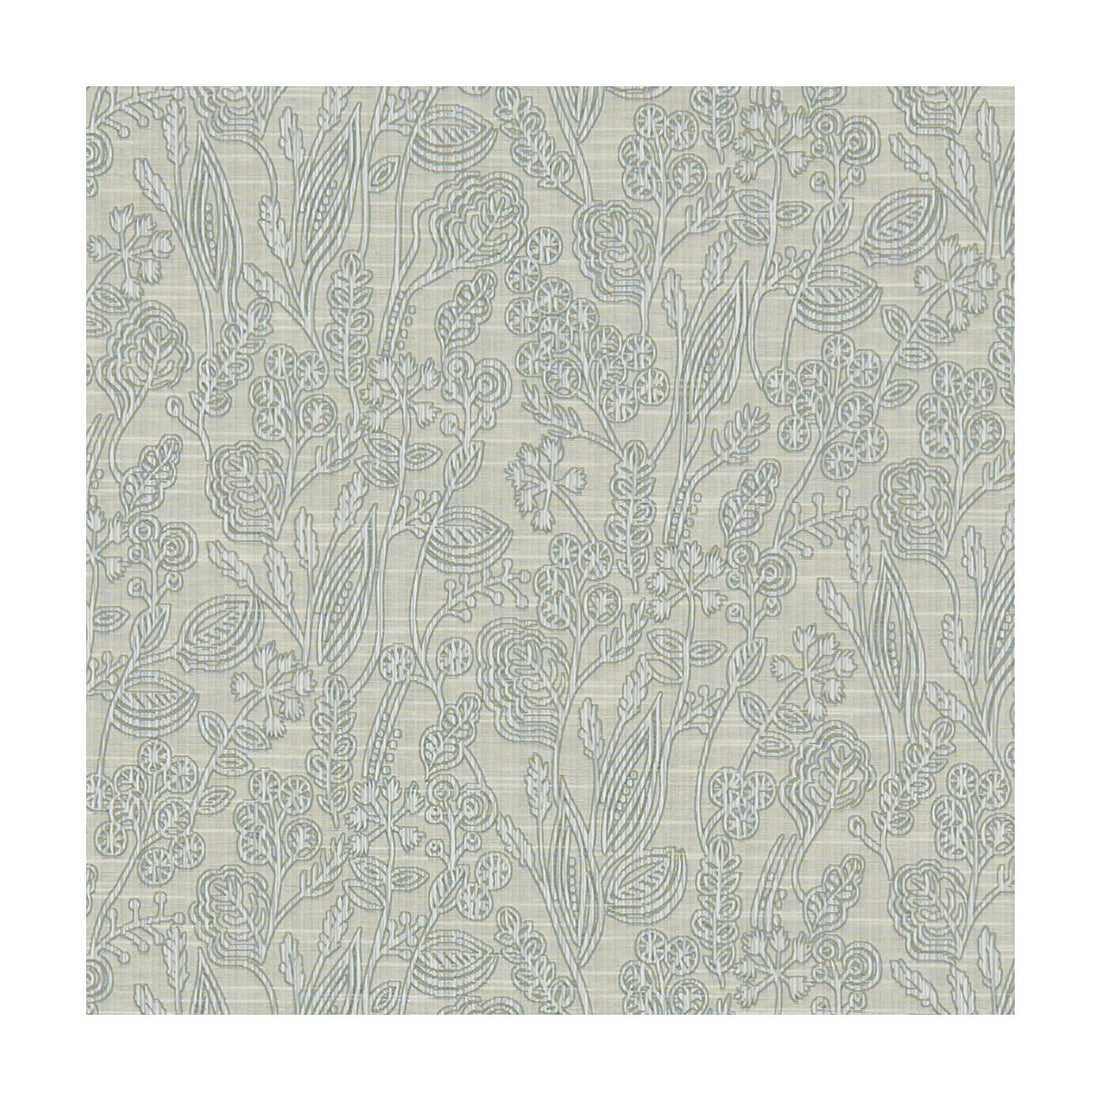 Marbury fabric in silver color - pattern F1230/07.CAC.0 - by Clarke And Clarke in the Marbury By Studio G For C&amp;C collection